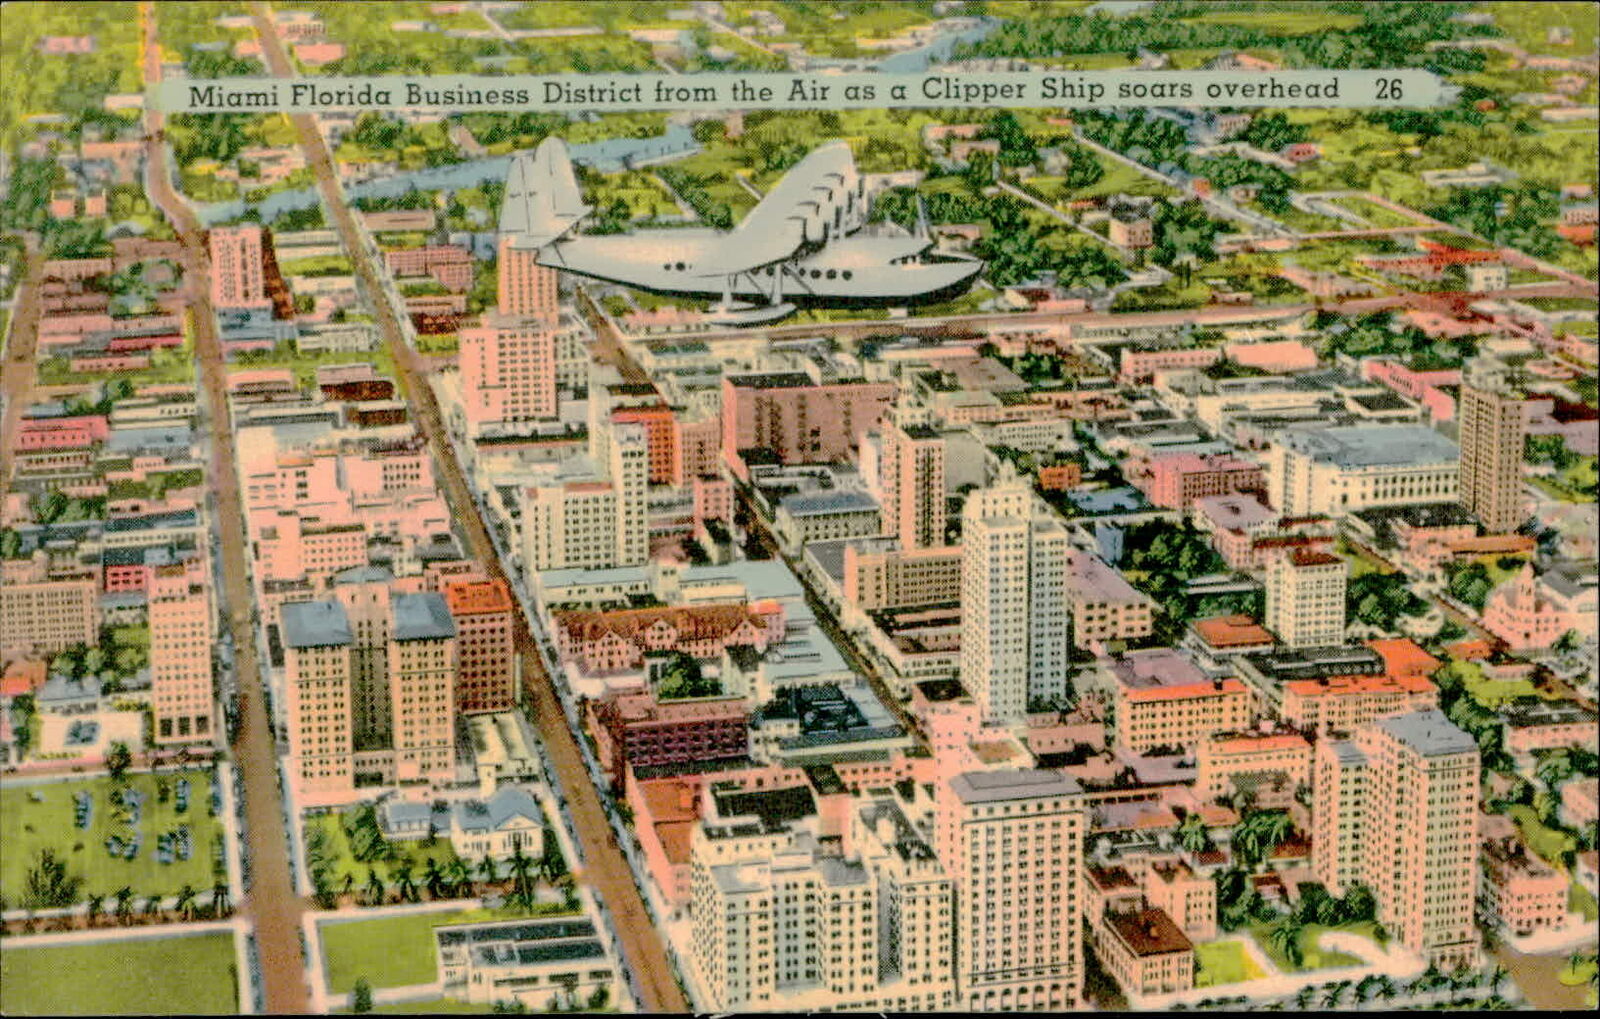 Postcard: Miami Florida Business District from the Air as a Clipper Sh